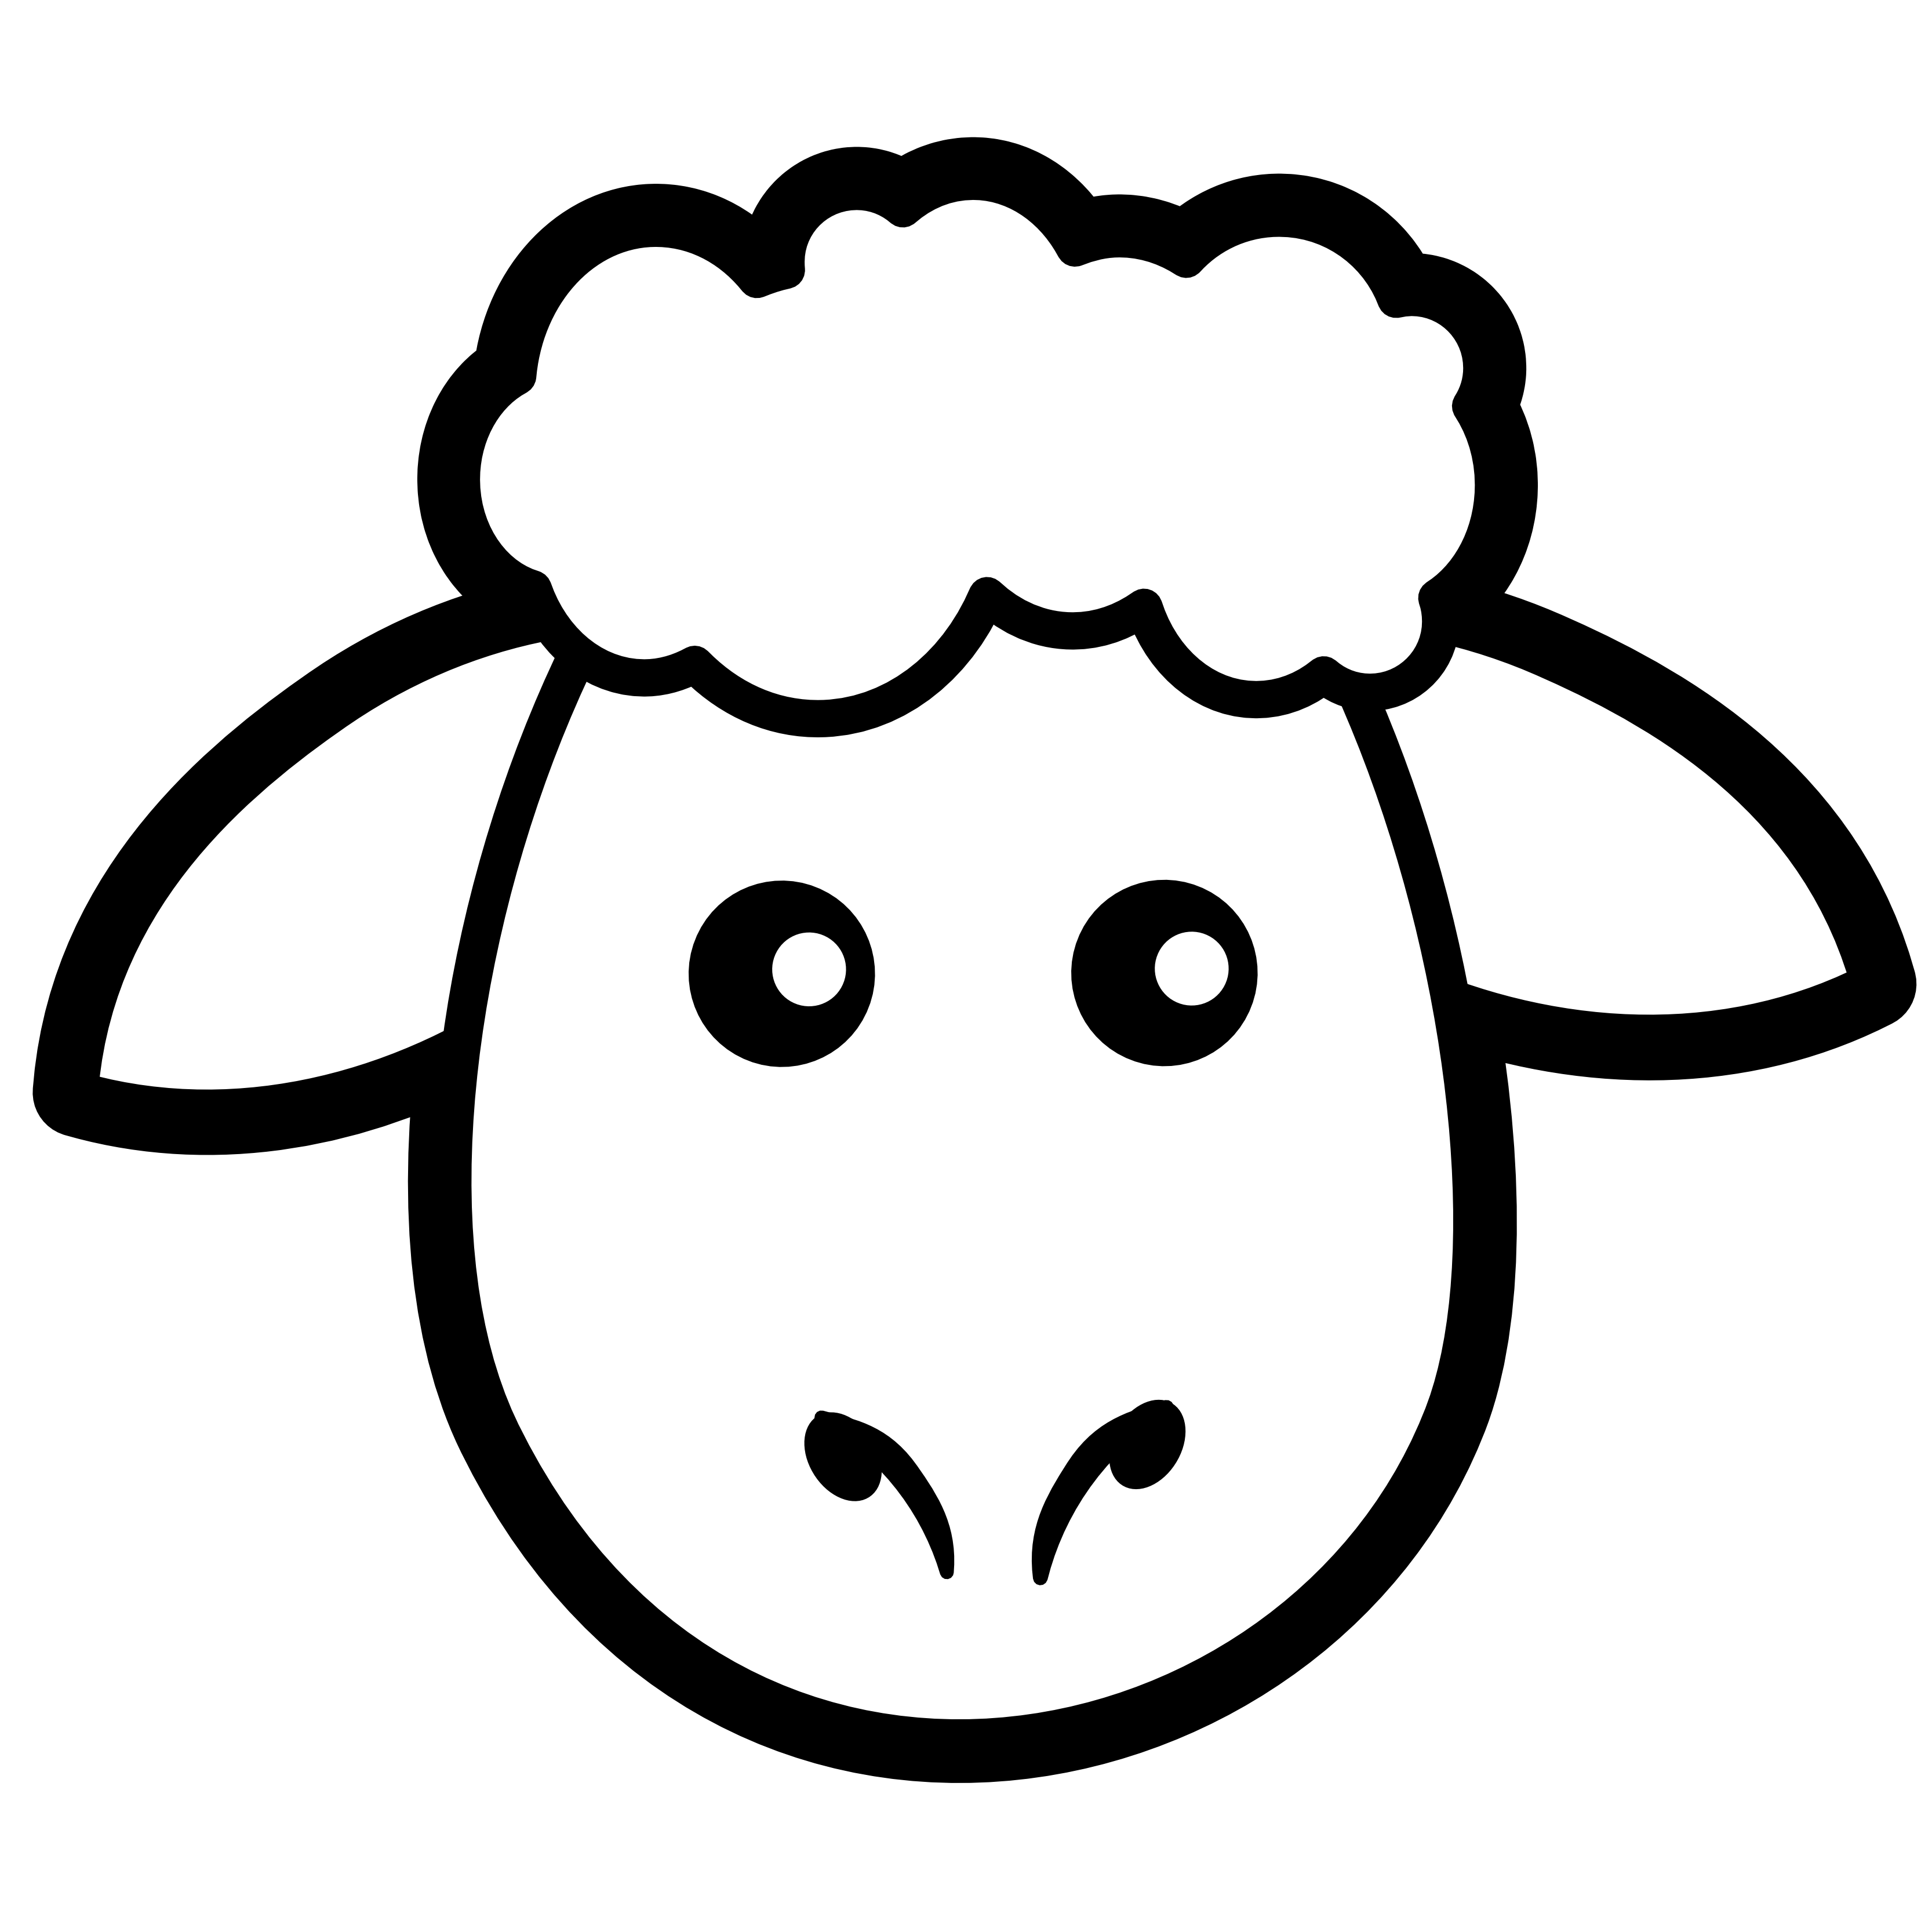 Sheep clipart black and white free clipart images